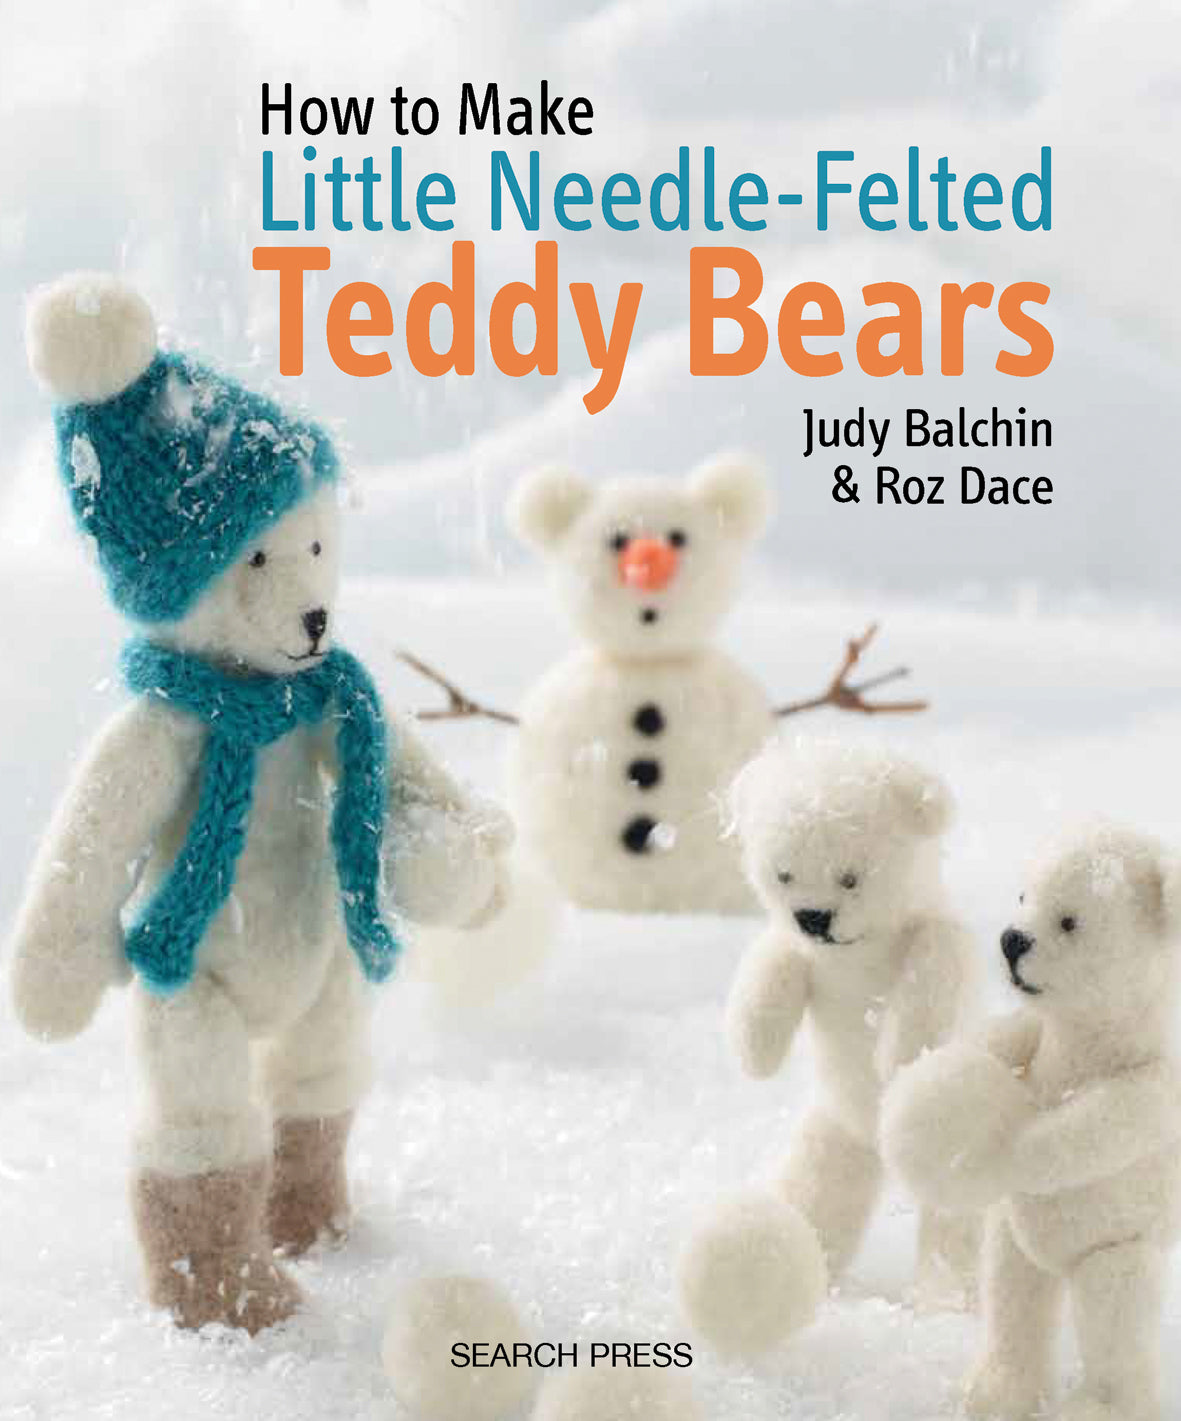 Book: How to Make Little Needle-Felted Teddy Bears by Judy Balchin and Roz Dace